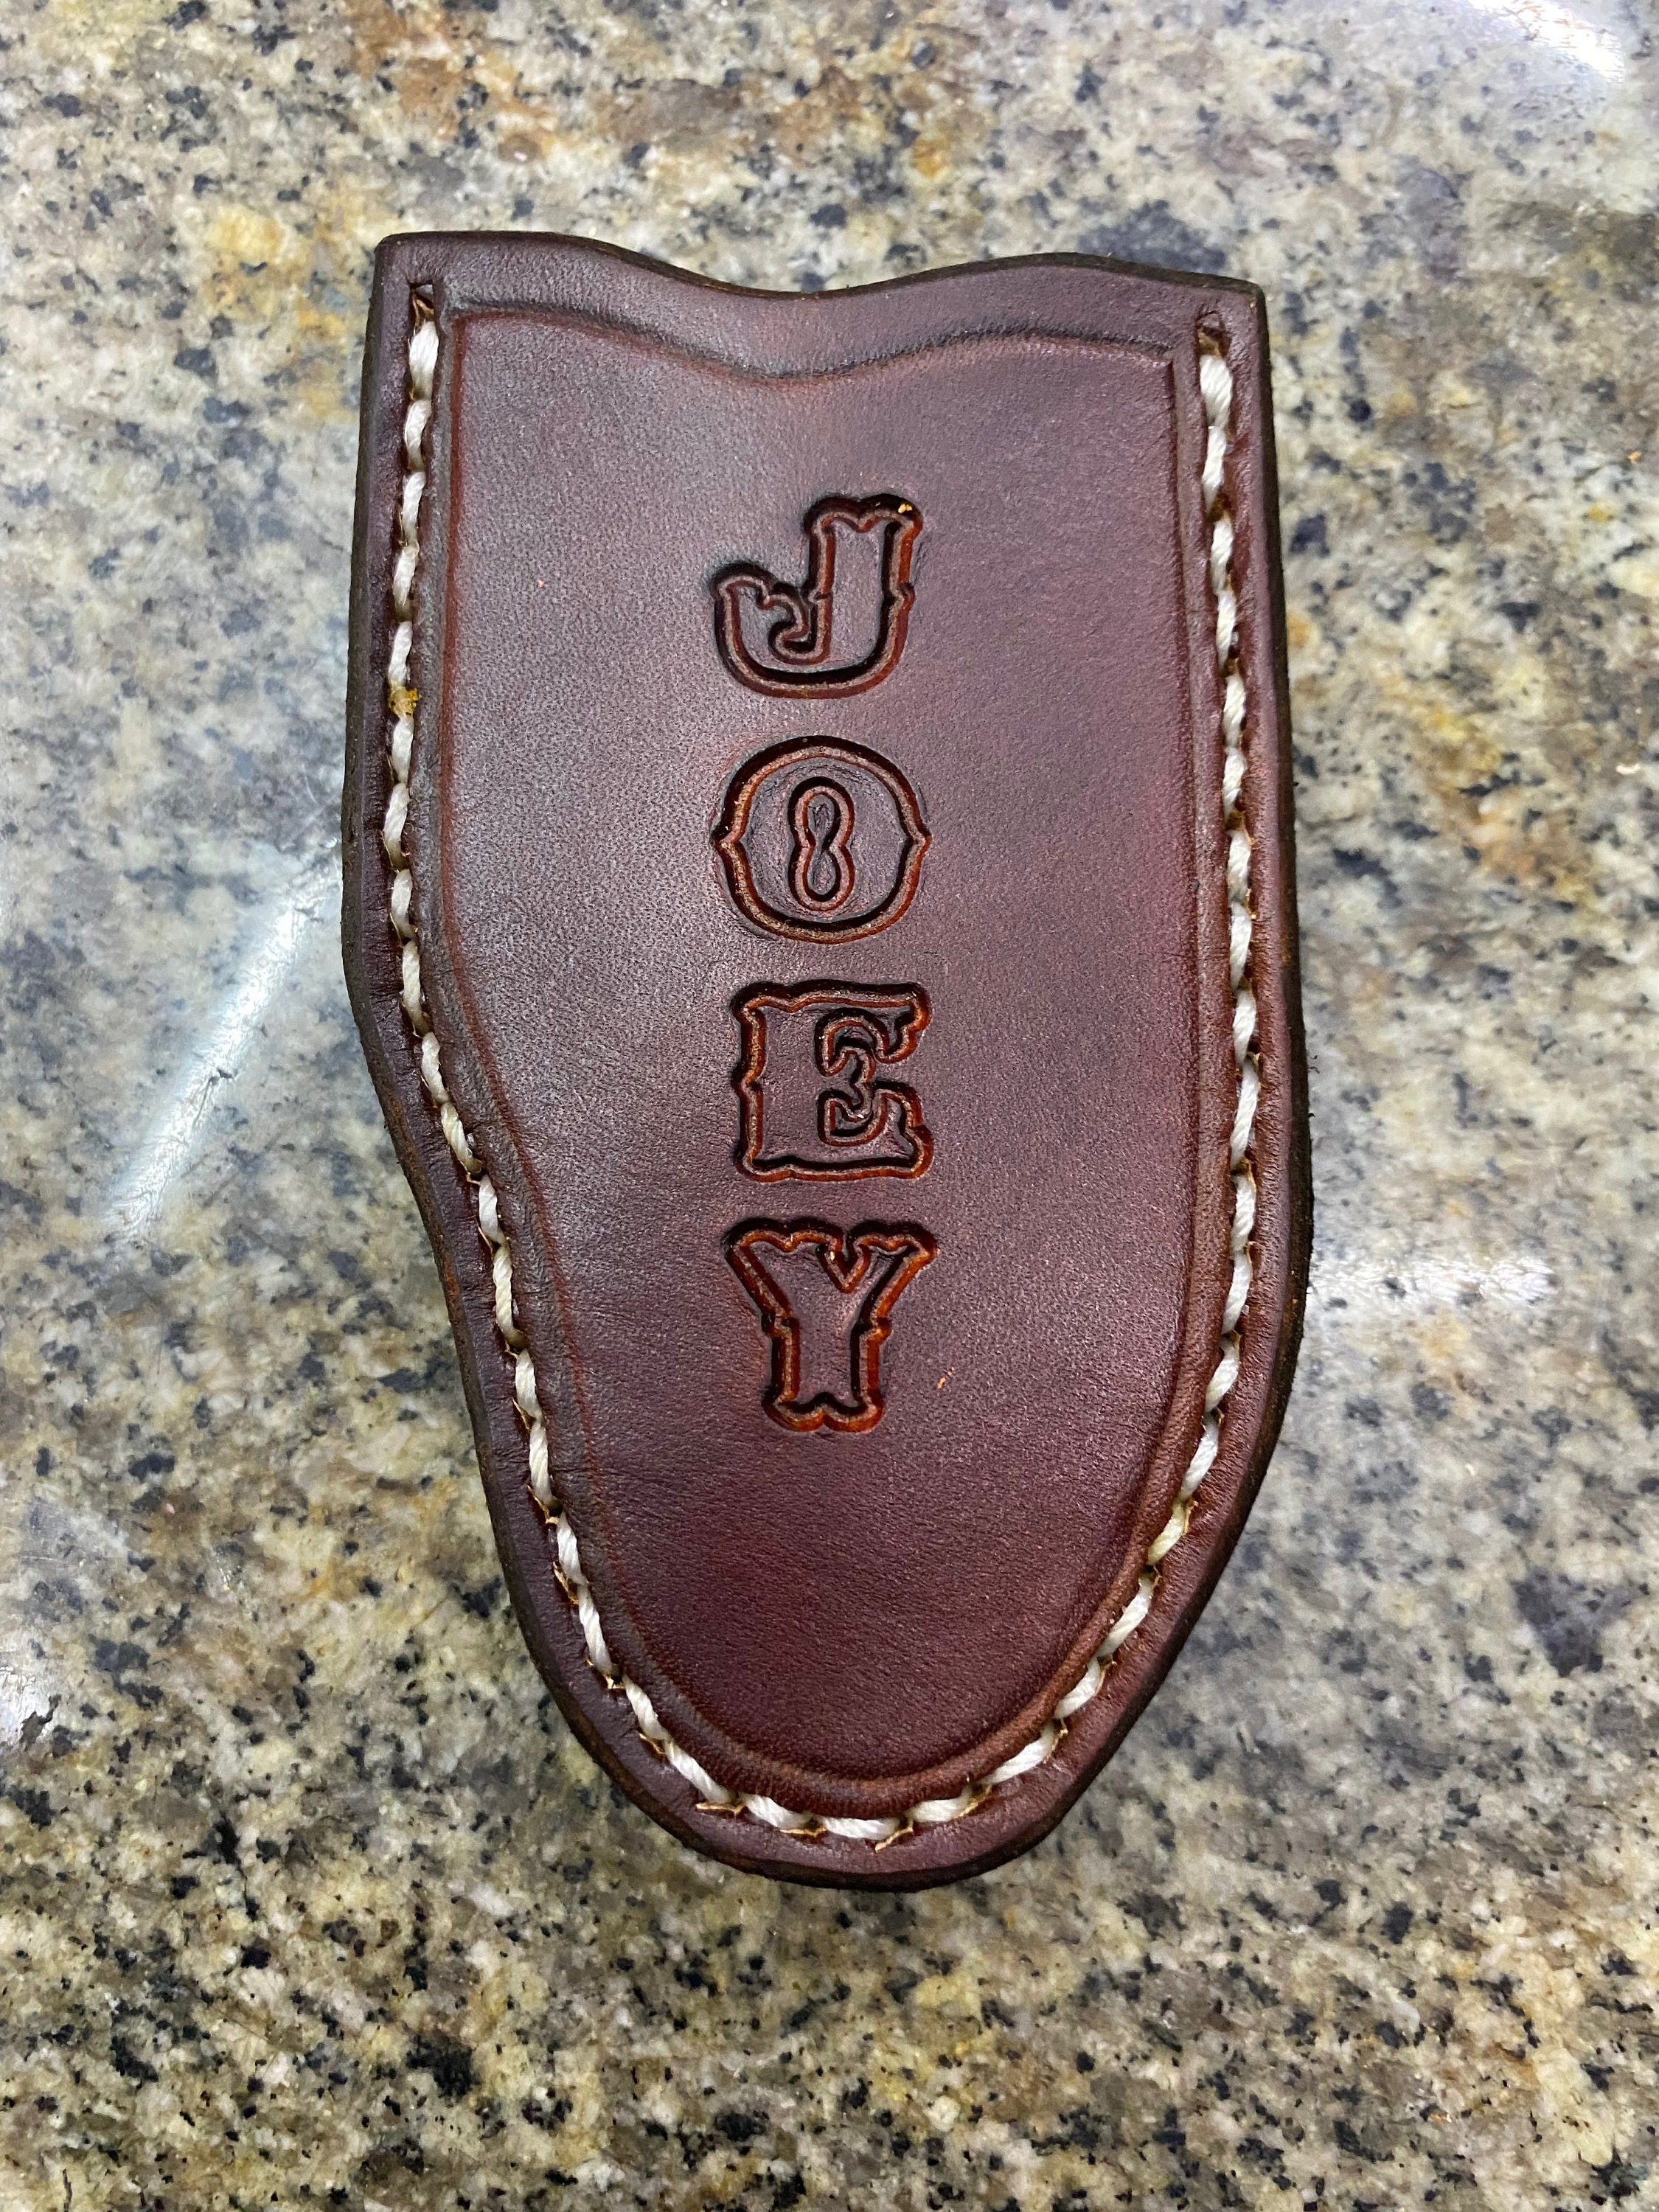 Sample Leather Tag Pendant Knife Mold Japanese Knife Material